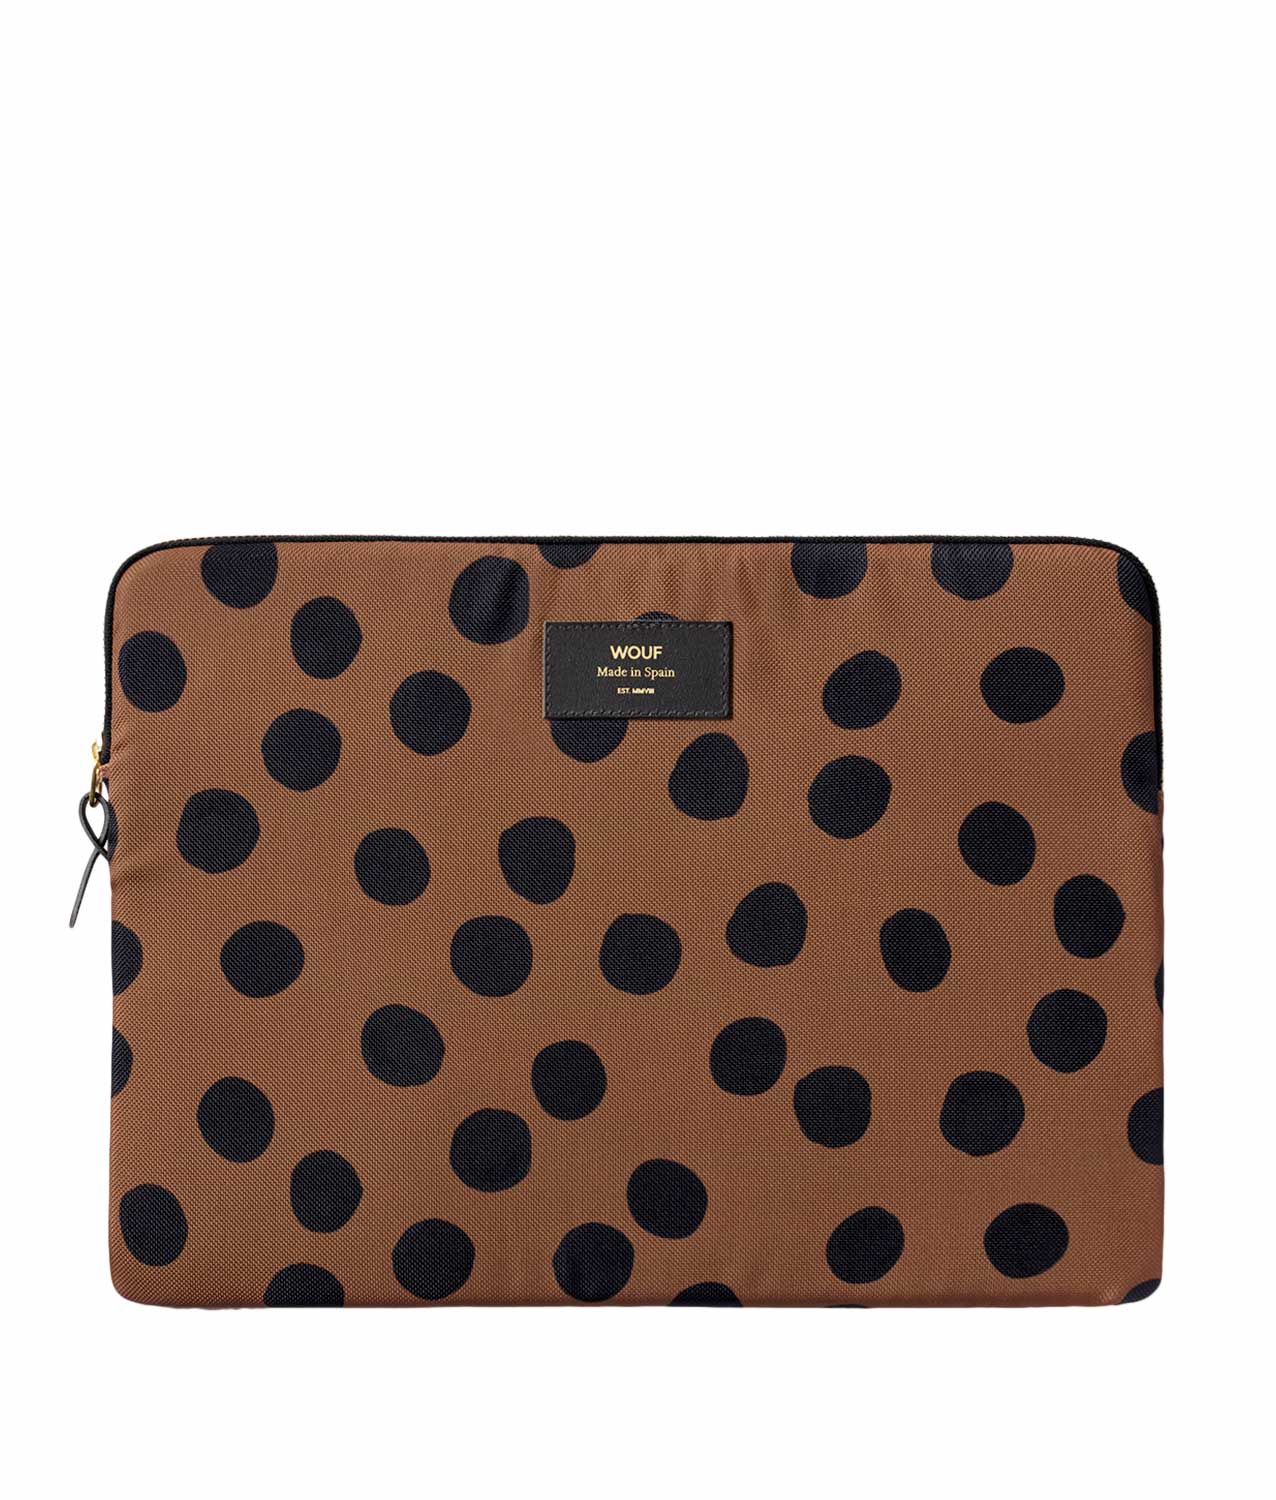 Wouf Dots 13-14inch Laptop Sleeve